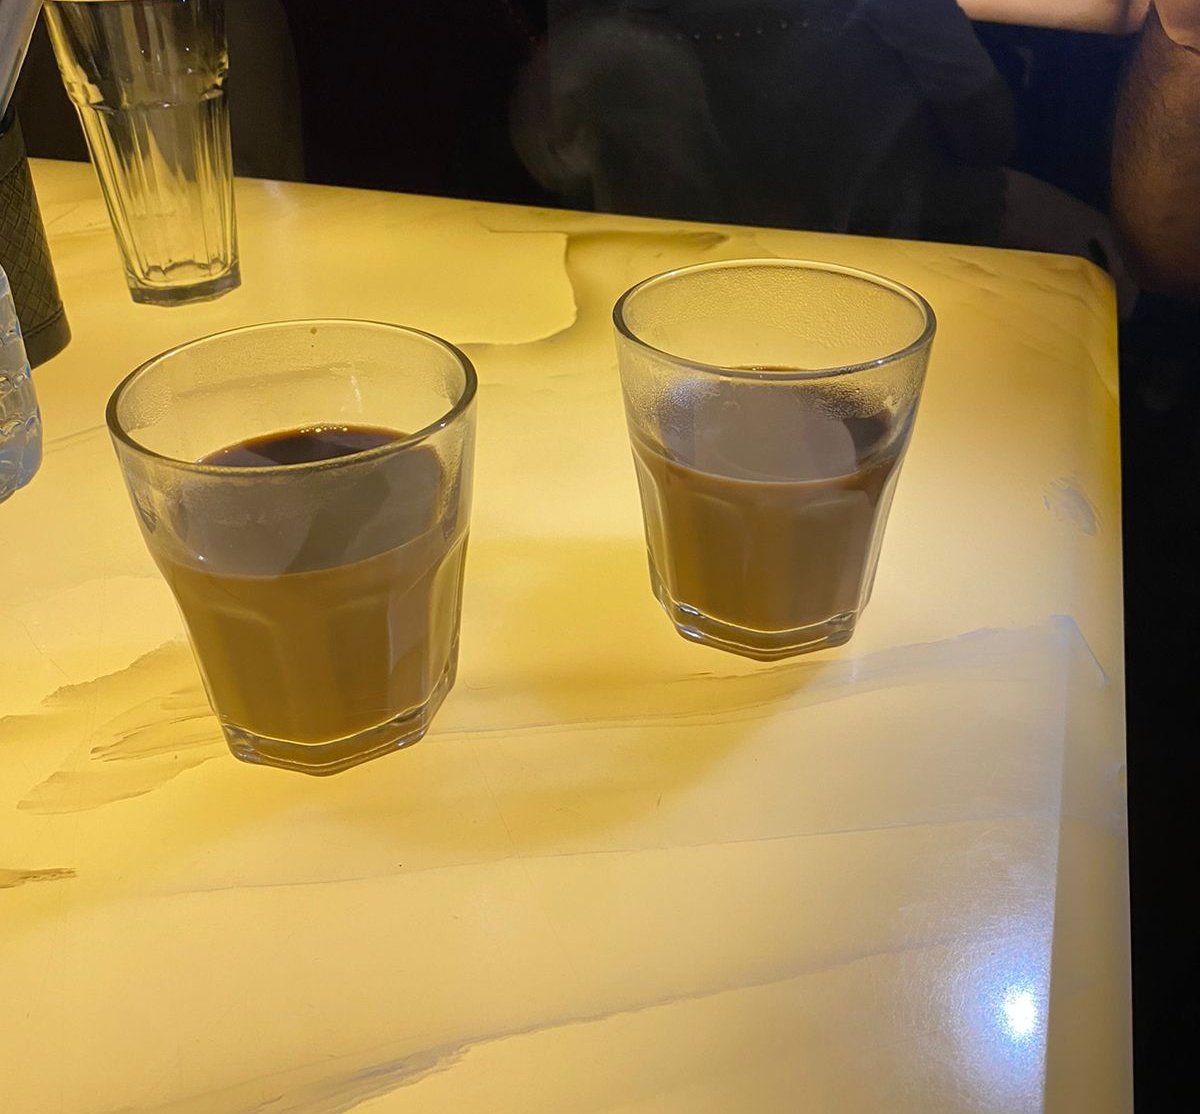 Gurgaon, the only place where Chai is also given in Whiskey glasses 😆